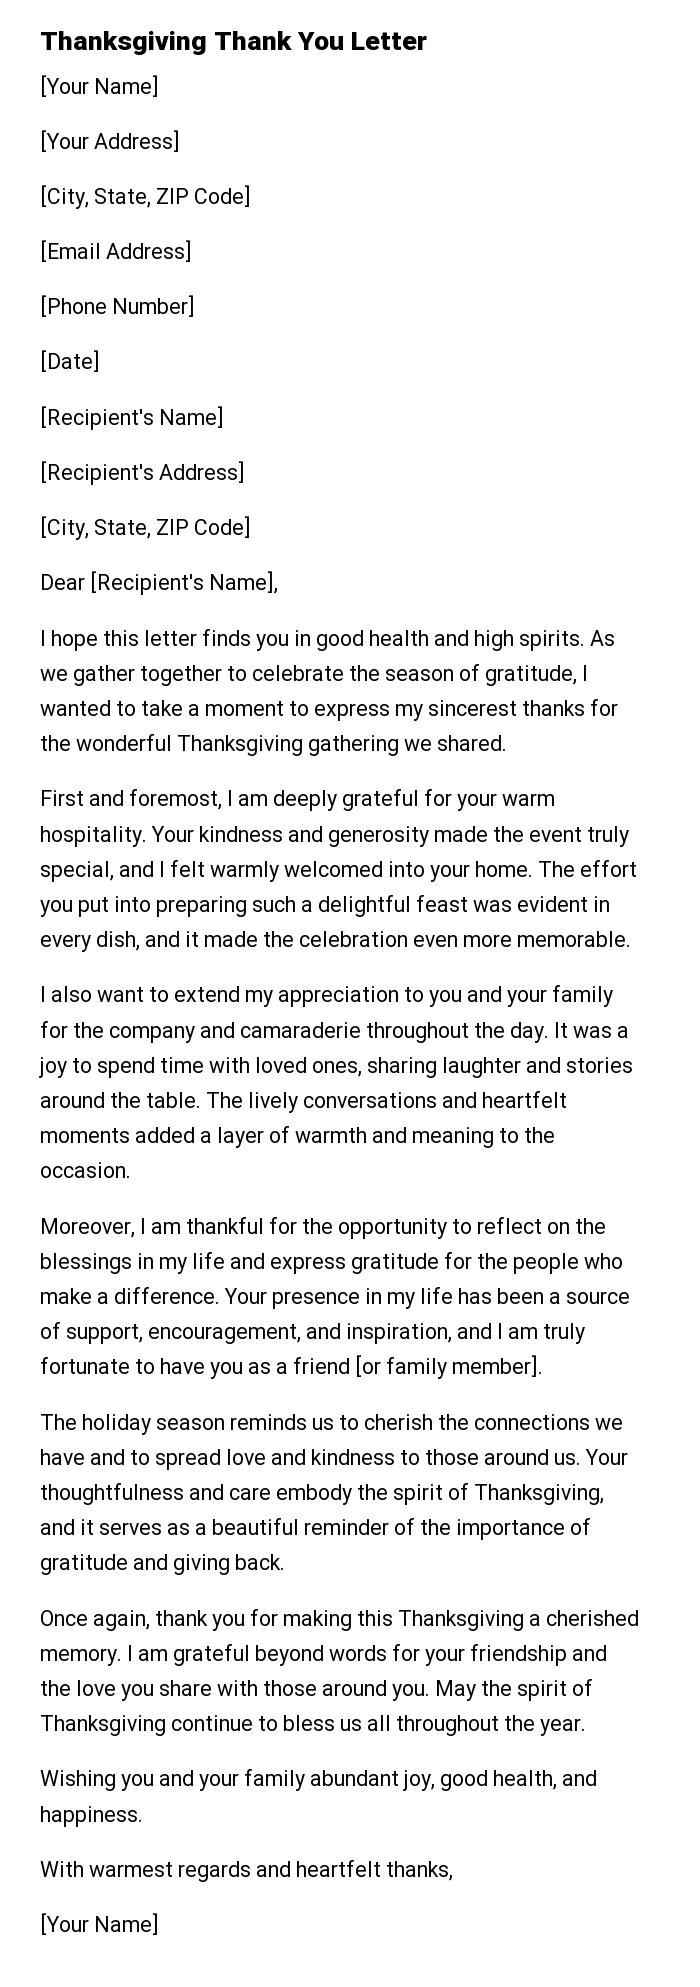 Thanksgiving Thank You Letter